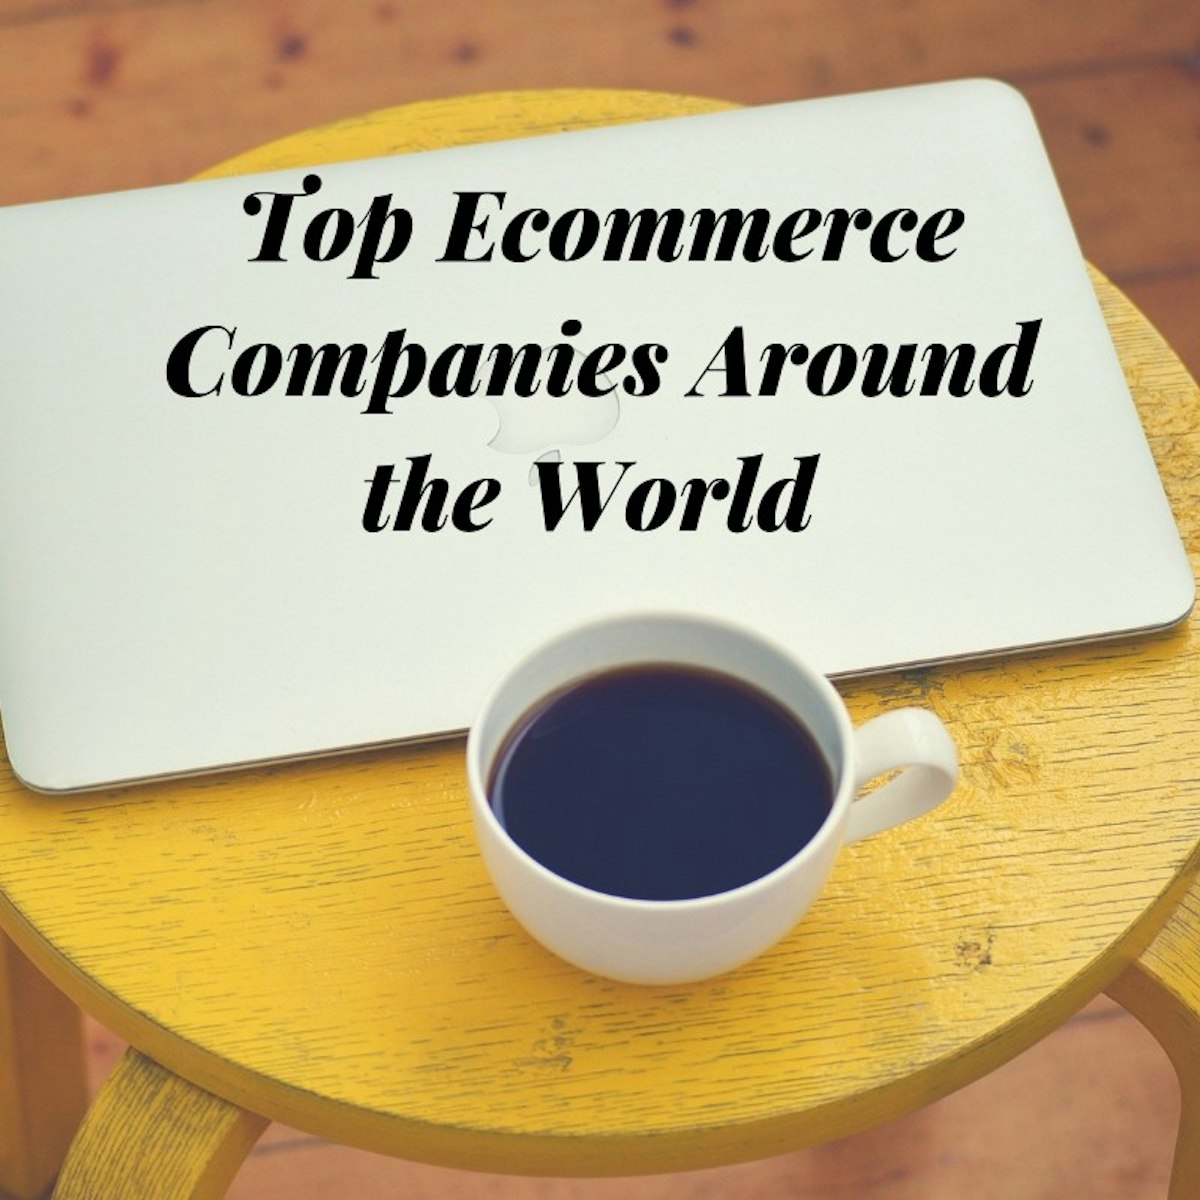 featured image - Top 10 E-Commerce Companies & Platforms Around the World